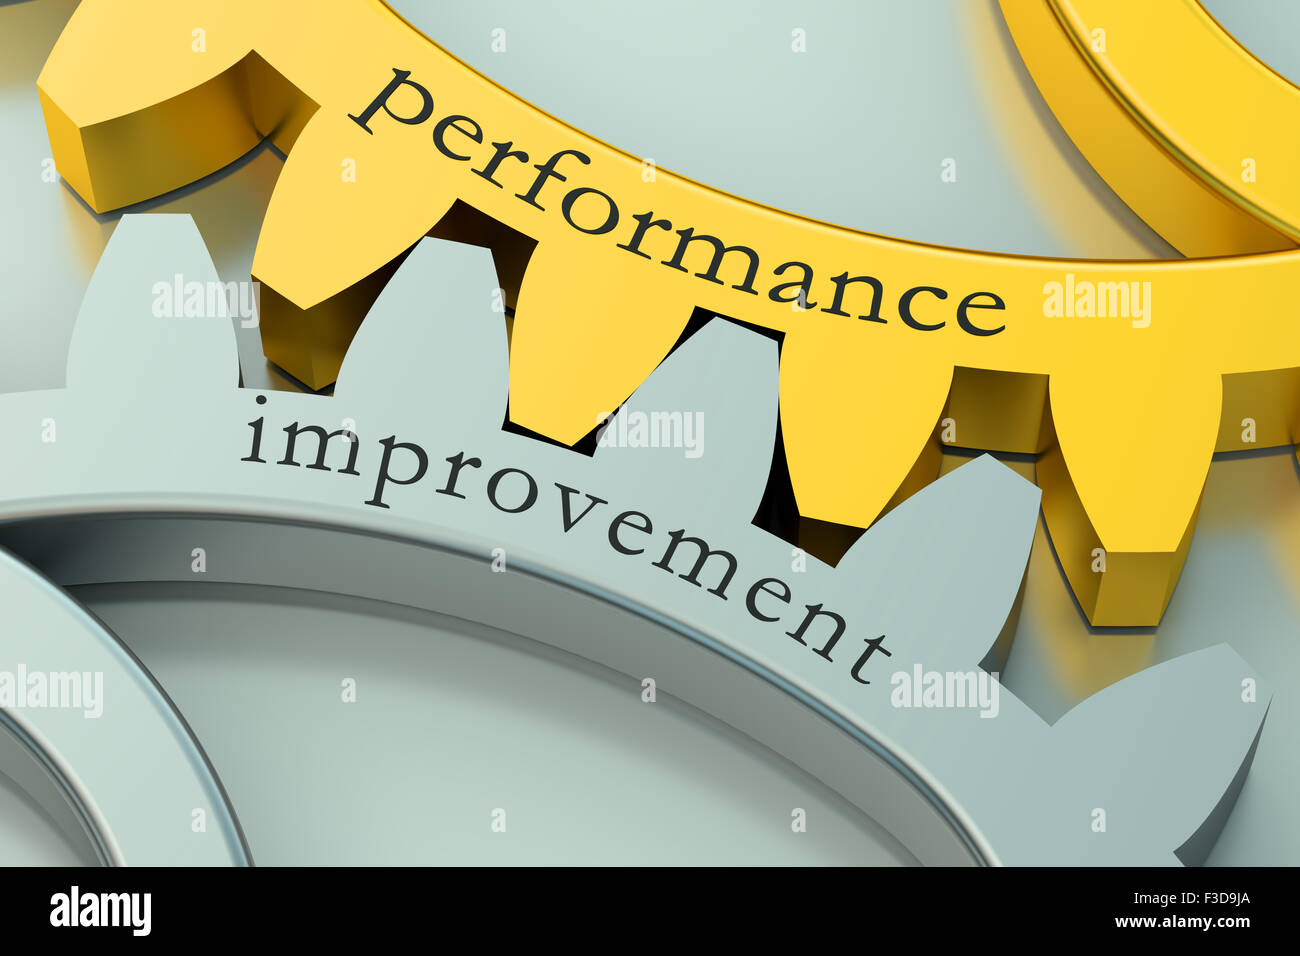 Performance Improvement concept on the gearwheels Stock Photo